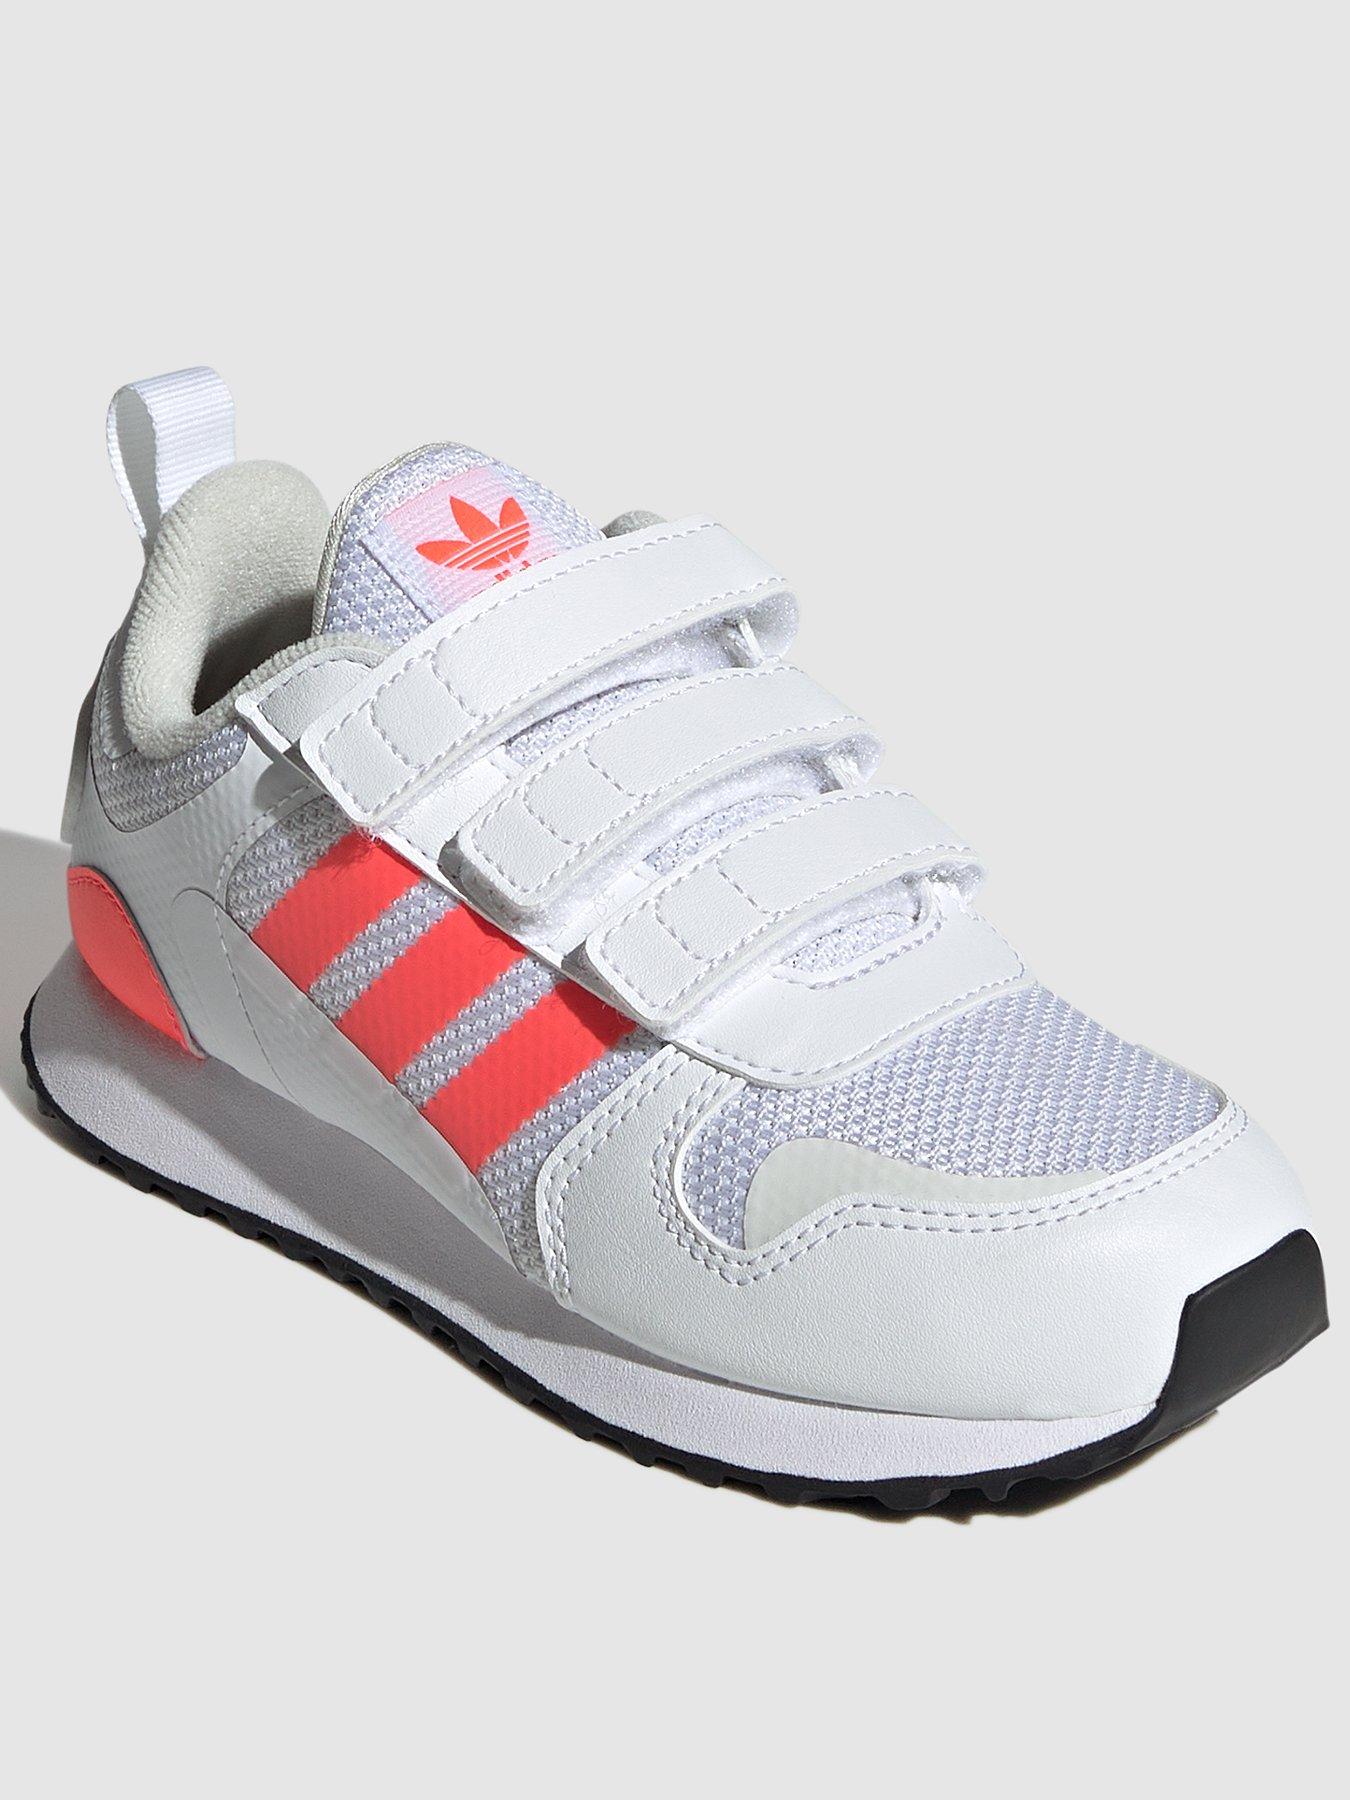 adidas Originals ZX | Trainers | Child & baby | www.very.co.uk